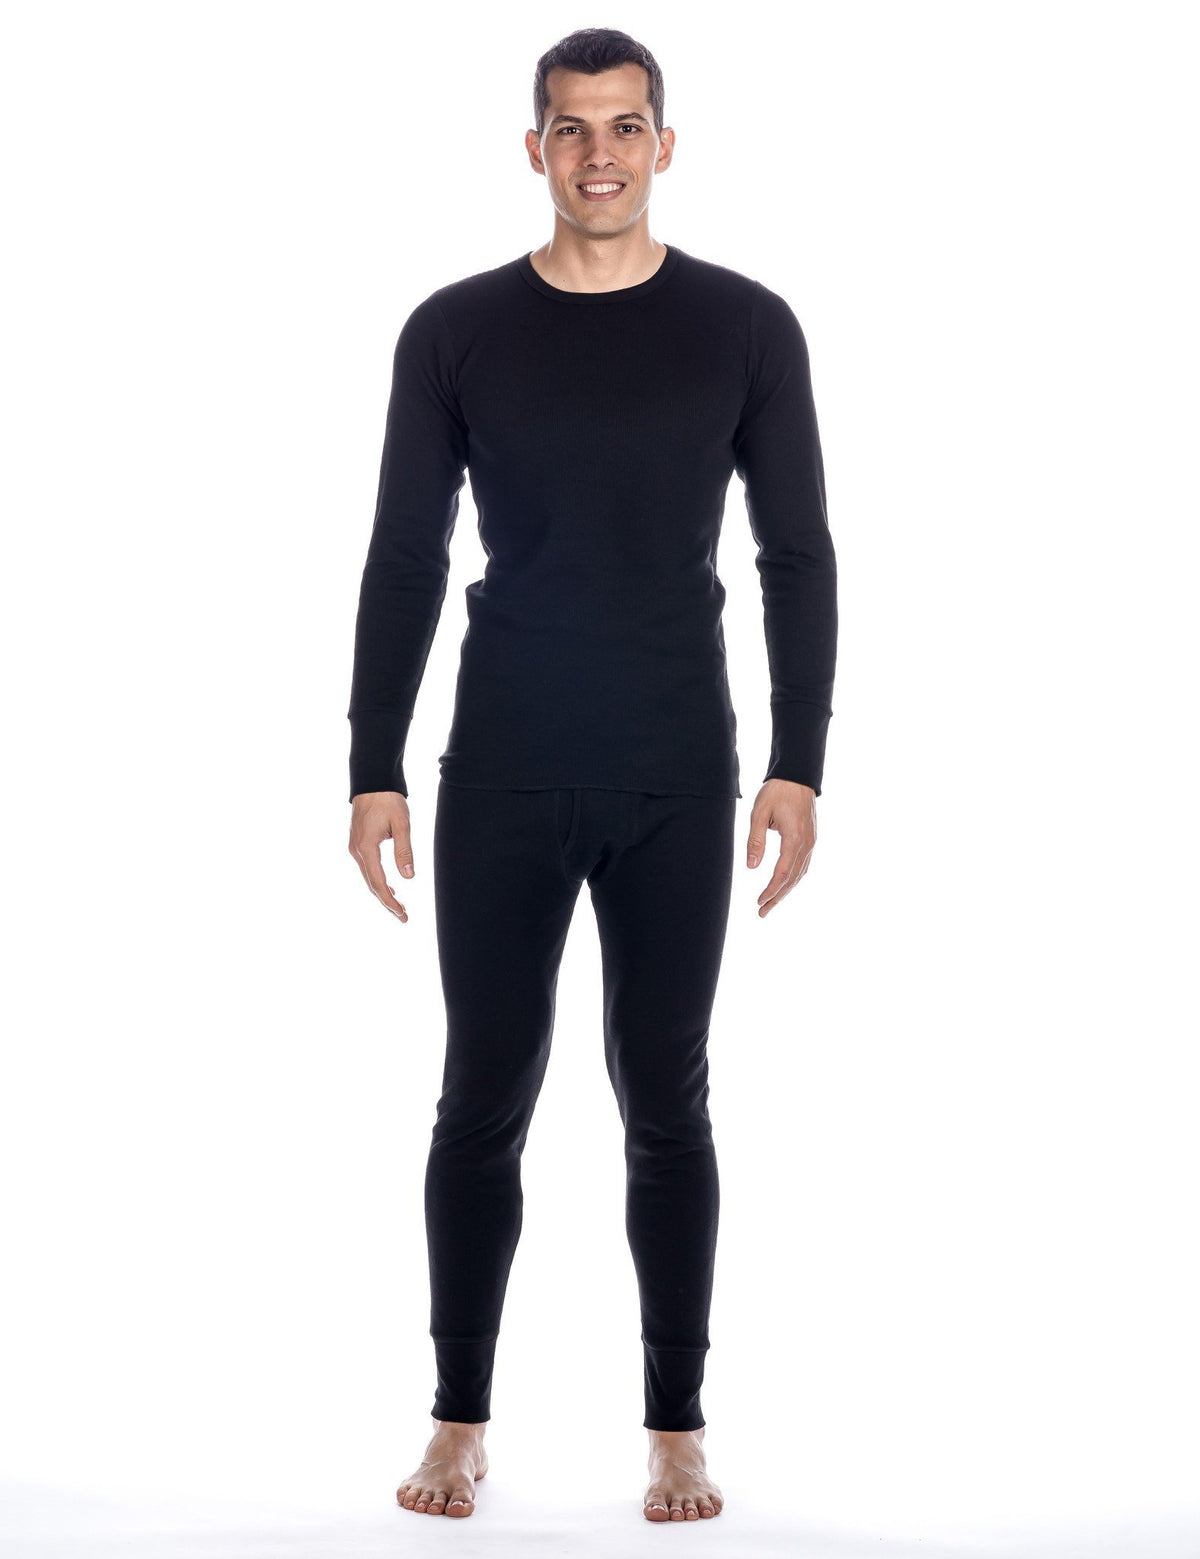 Men's Classic Waffle Knit Thermal Top and Bottom Set - Black